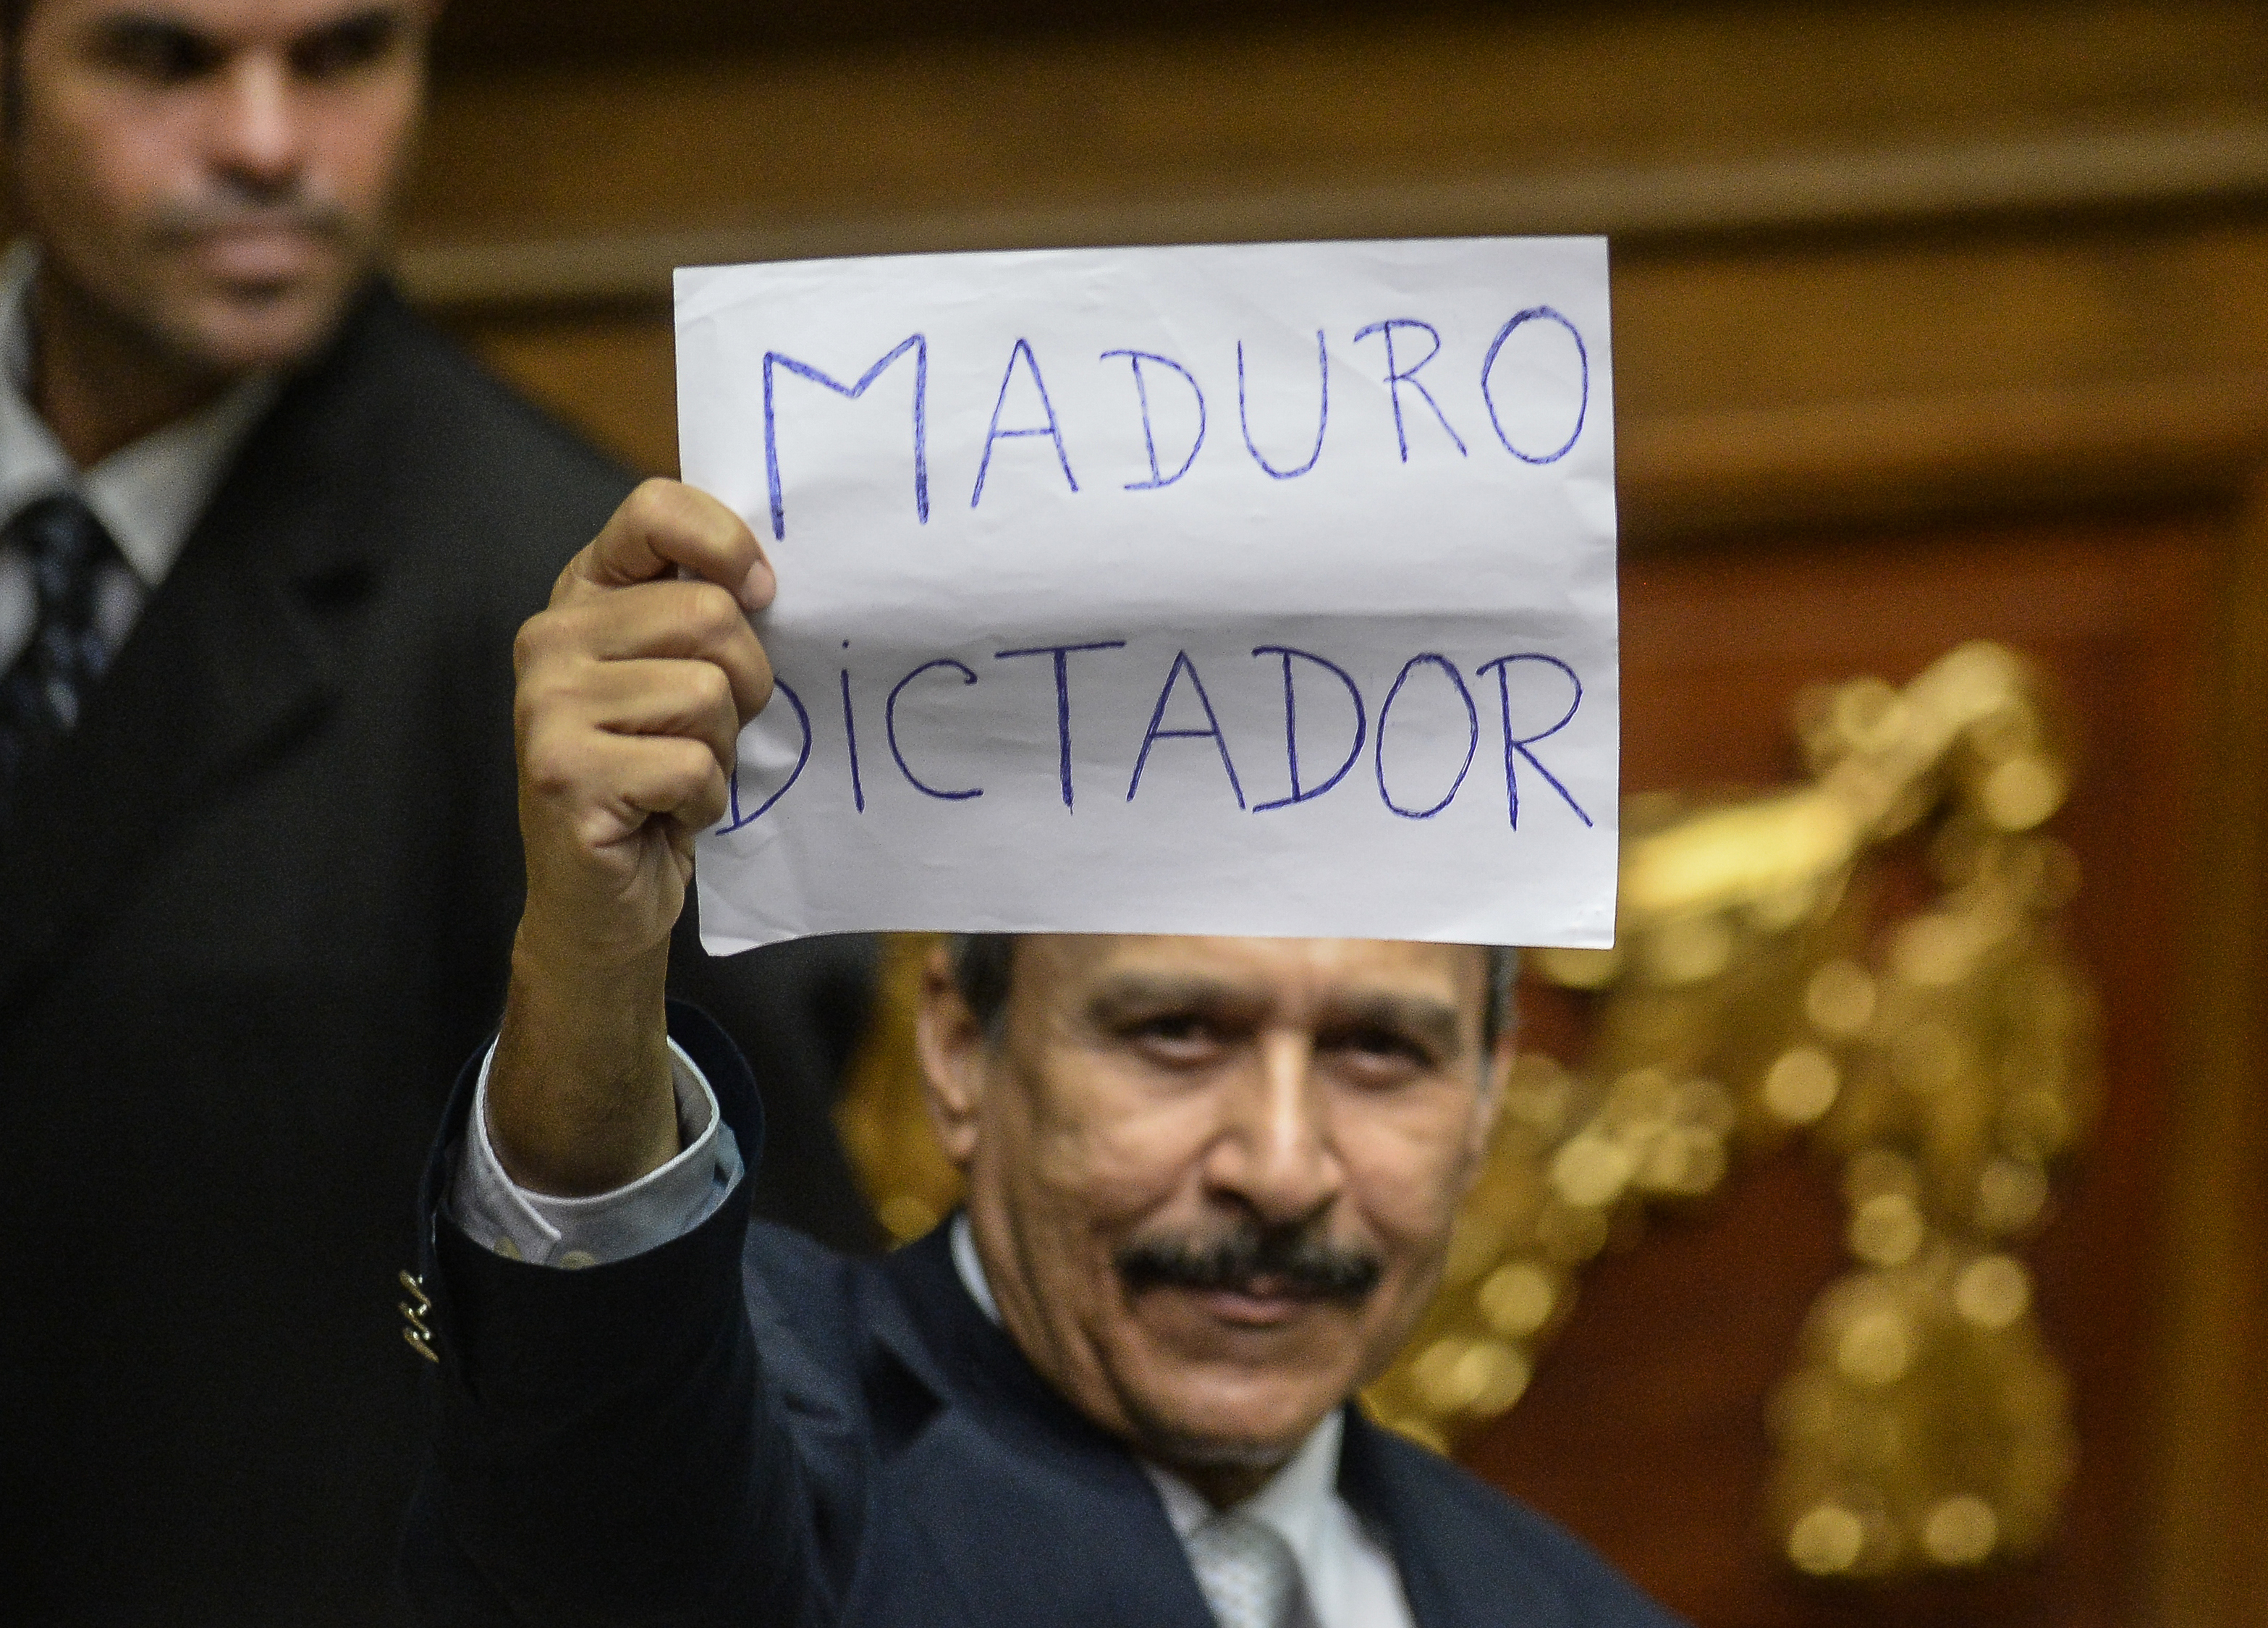 A Venezuelan opposition deputy holds up a sing reading " Maduro dictator"  during an extraoridinary session of the National Assembly, in Caracas on October 23, 2016. Venezuela's opposition-majority legislature declared Sunday that President Nicolas Maduro's "regime" committed a coup d'etat when authorities blocked a referendum on removing the unpopular leftist leader from power. / AFP PHOTO / FEDERICO PARRA